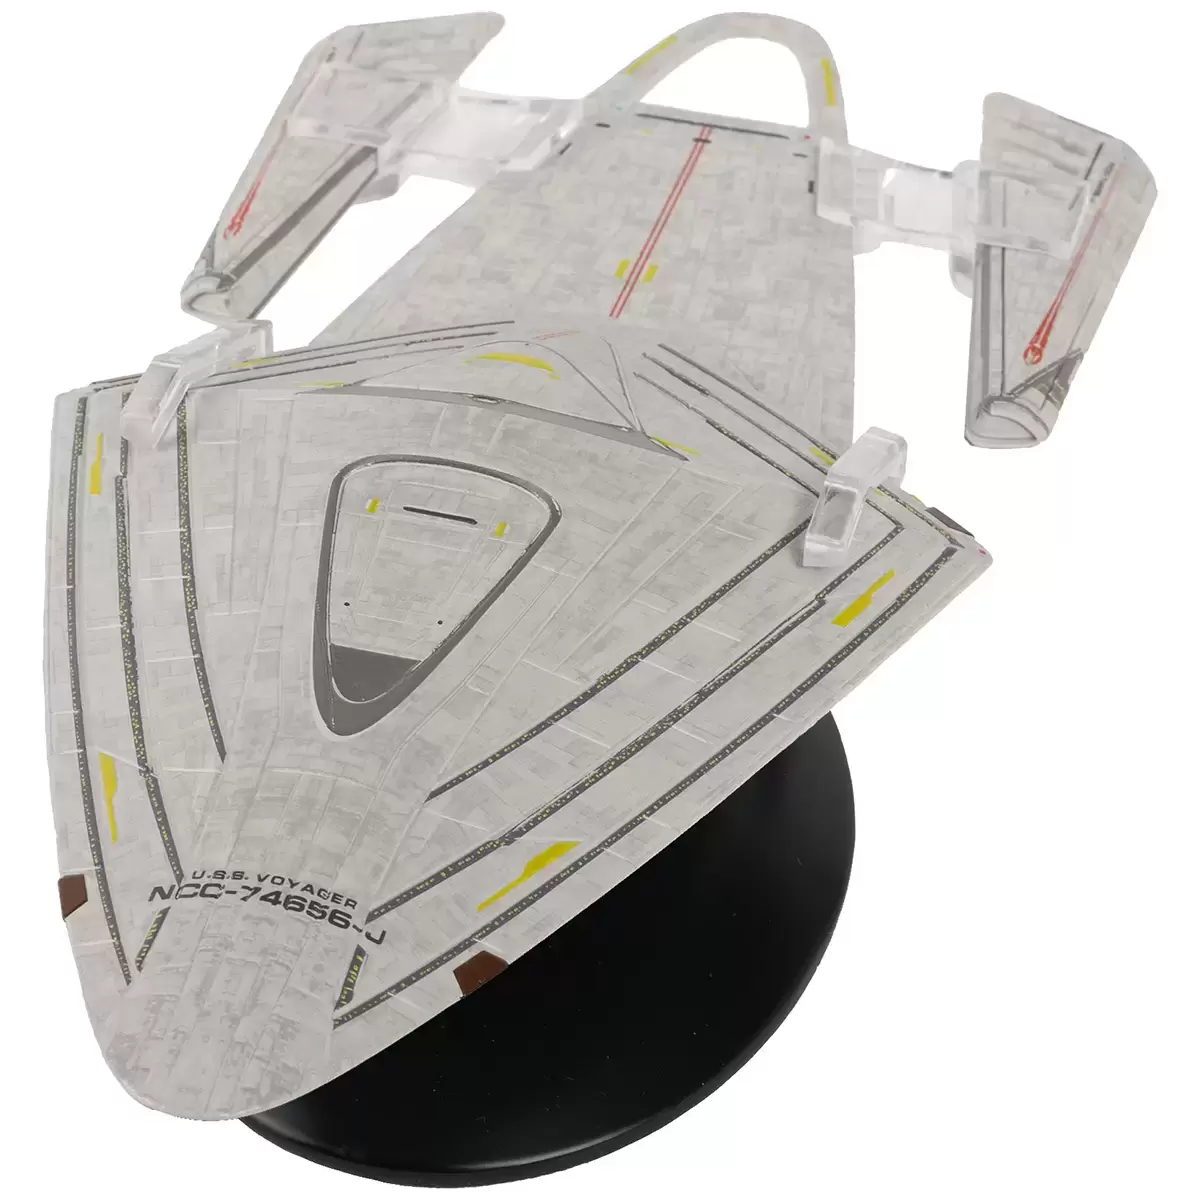 Star Trek Universe The Official Starships Collection - U.S.S. Voyager NCC-74656-J (Intrepid-class)